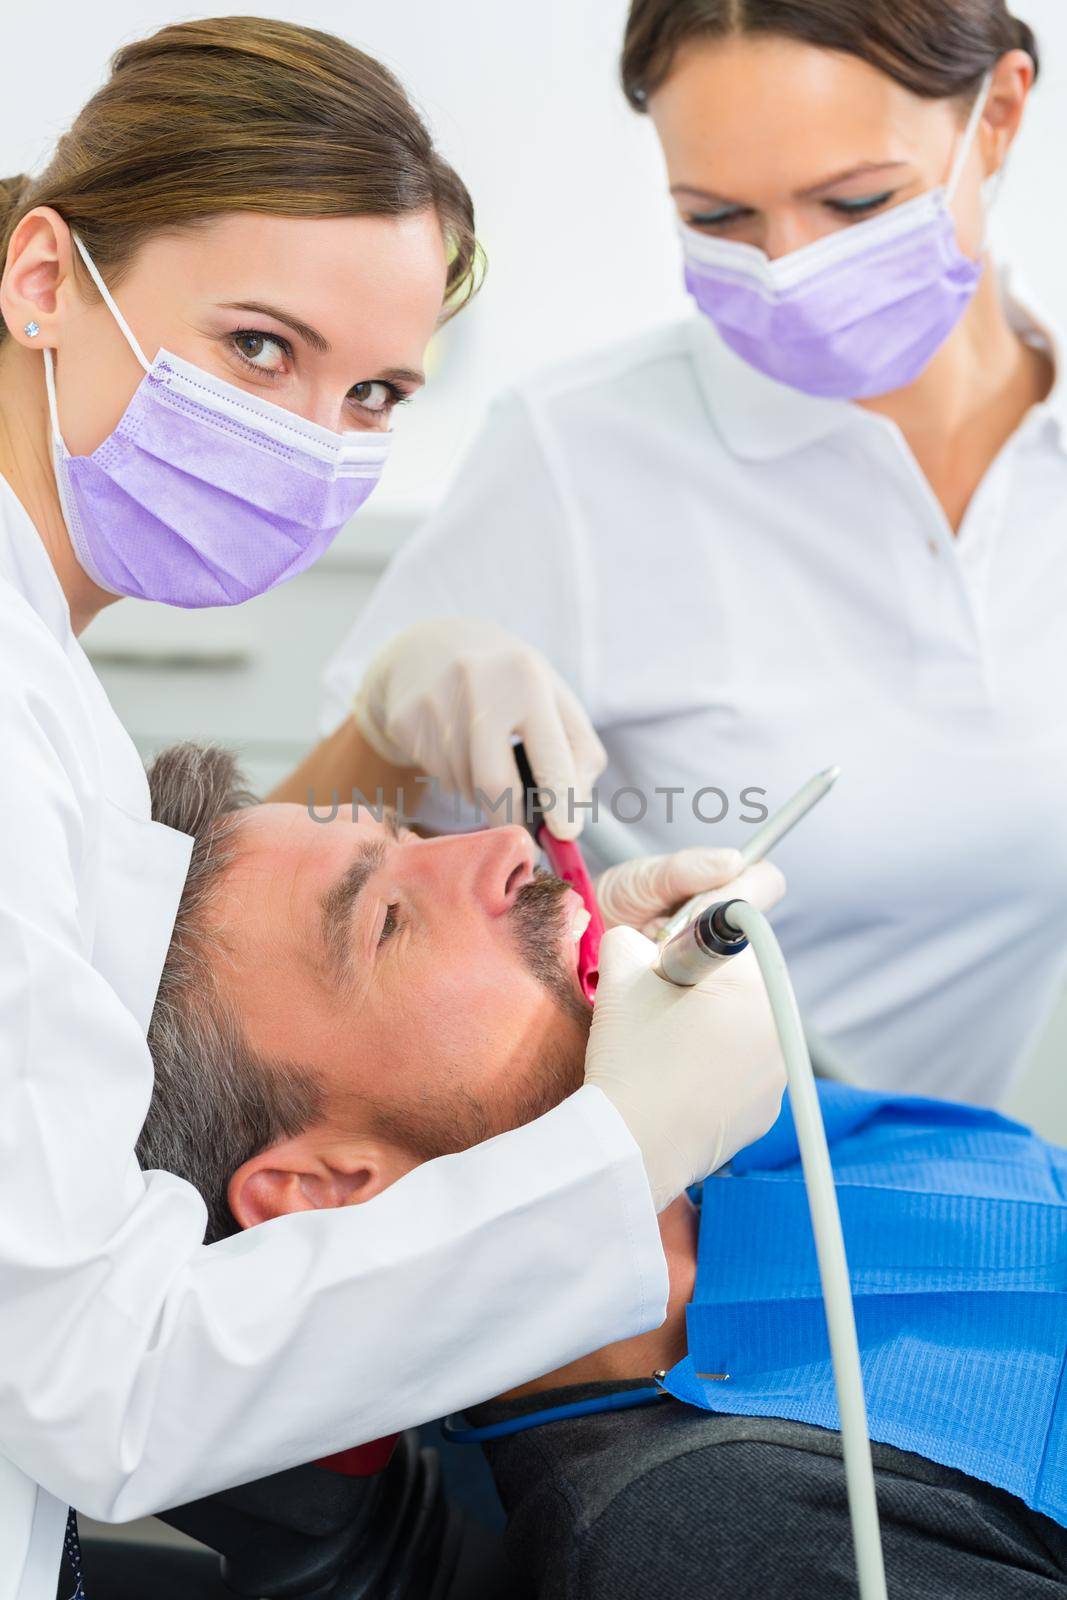 dentist in her practice or office treating male patient with assistant wearing masks and gloves